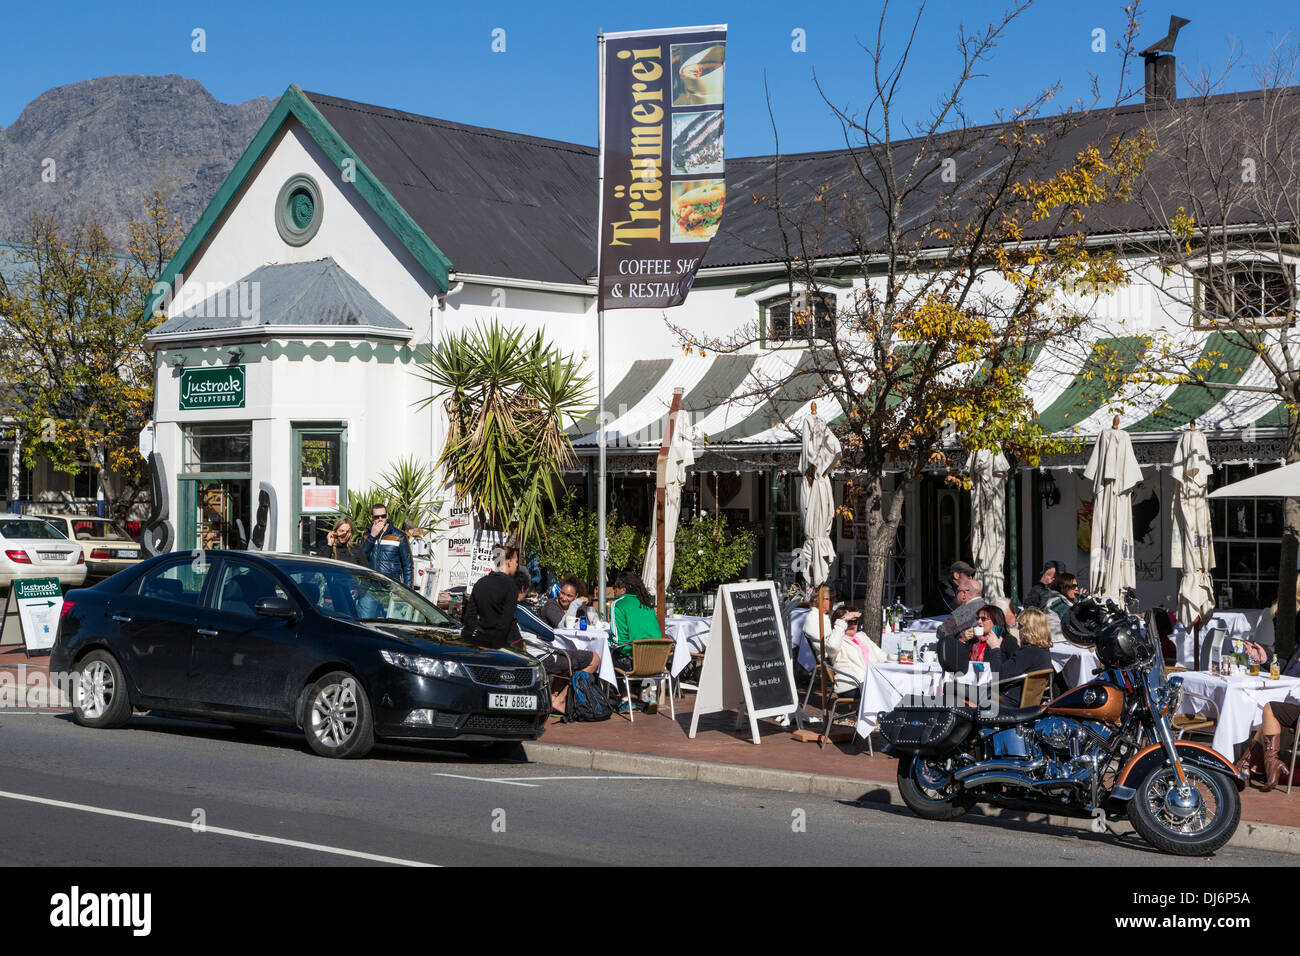 South Africa, Franschhoek. Traumerei Coffee Shop and Restaurant. Stock Photo